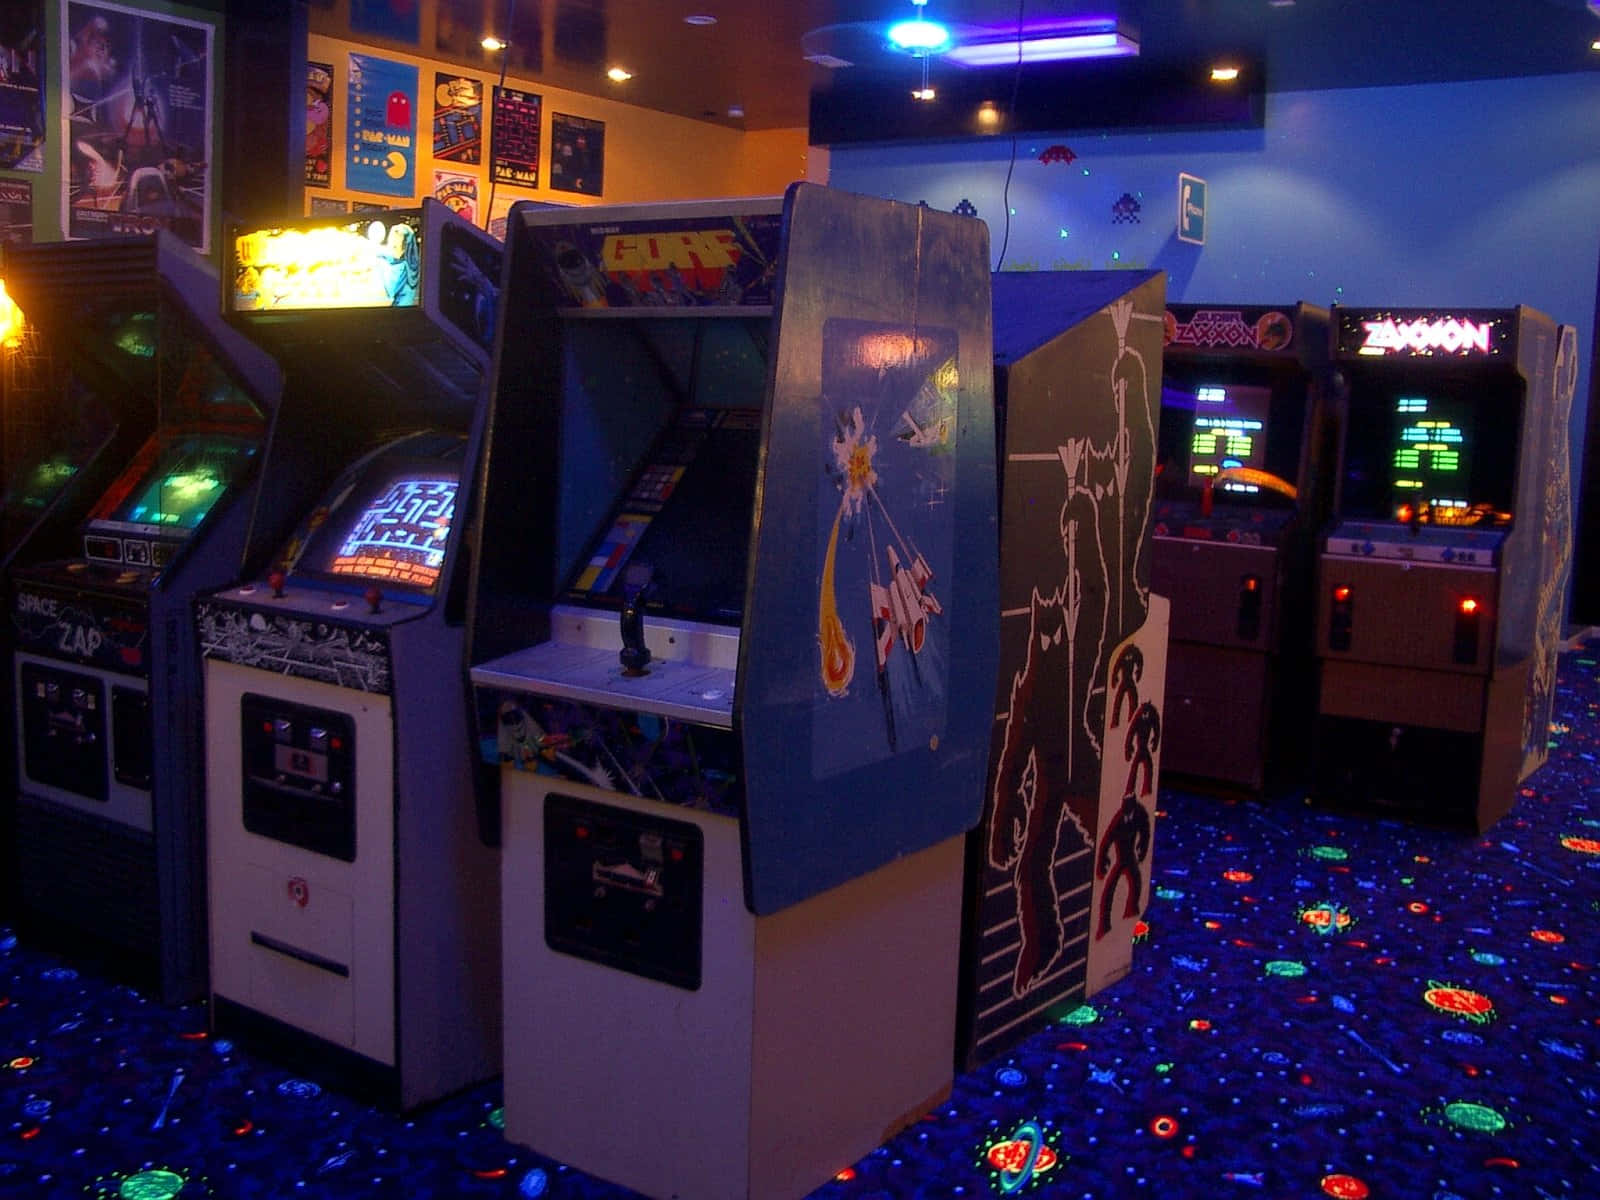 Enjoy the Classic Aesthetic of the Arcade Wallpaper